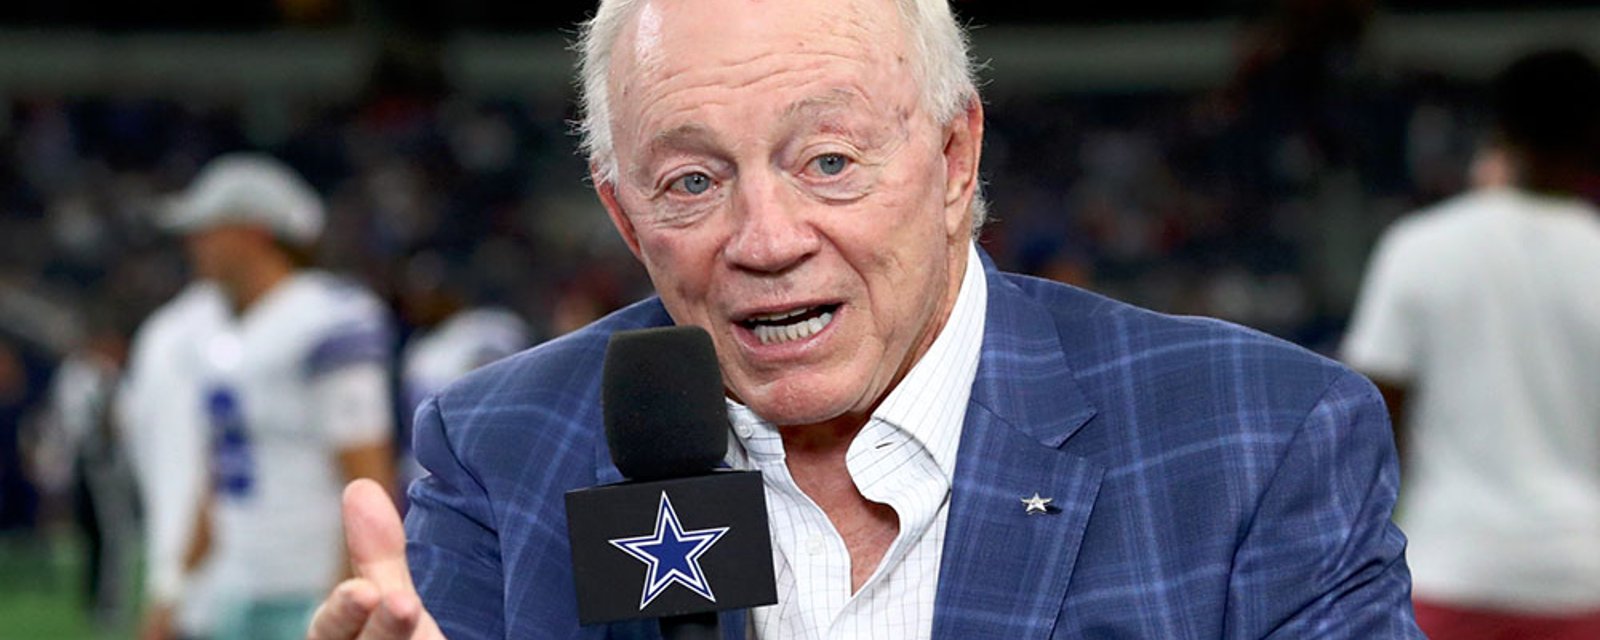 Cowboys owner Jerry Jones goes viral for post-game kiss (VIDEO)